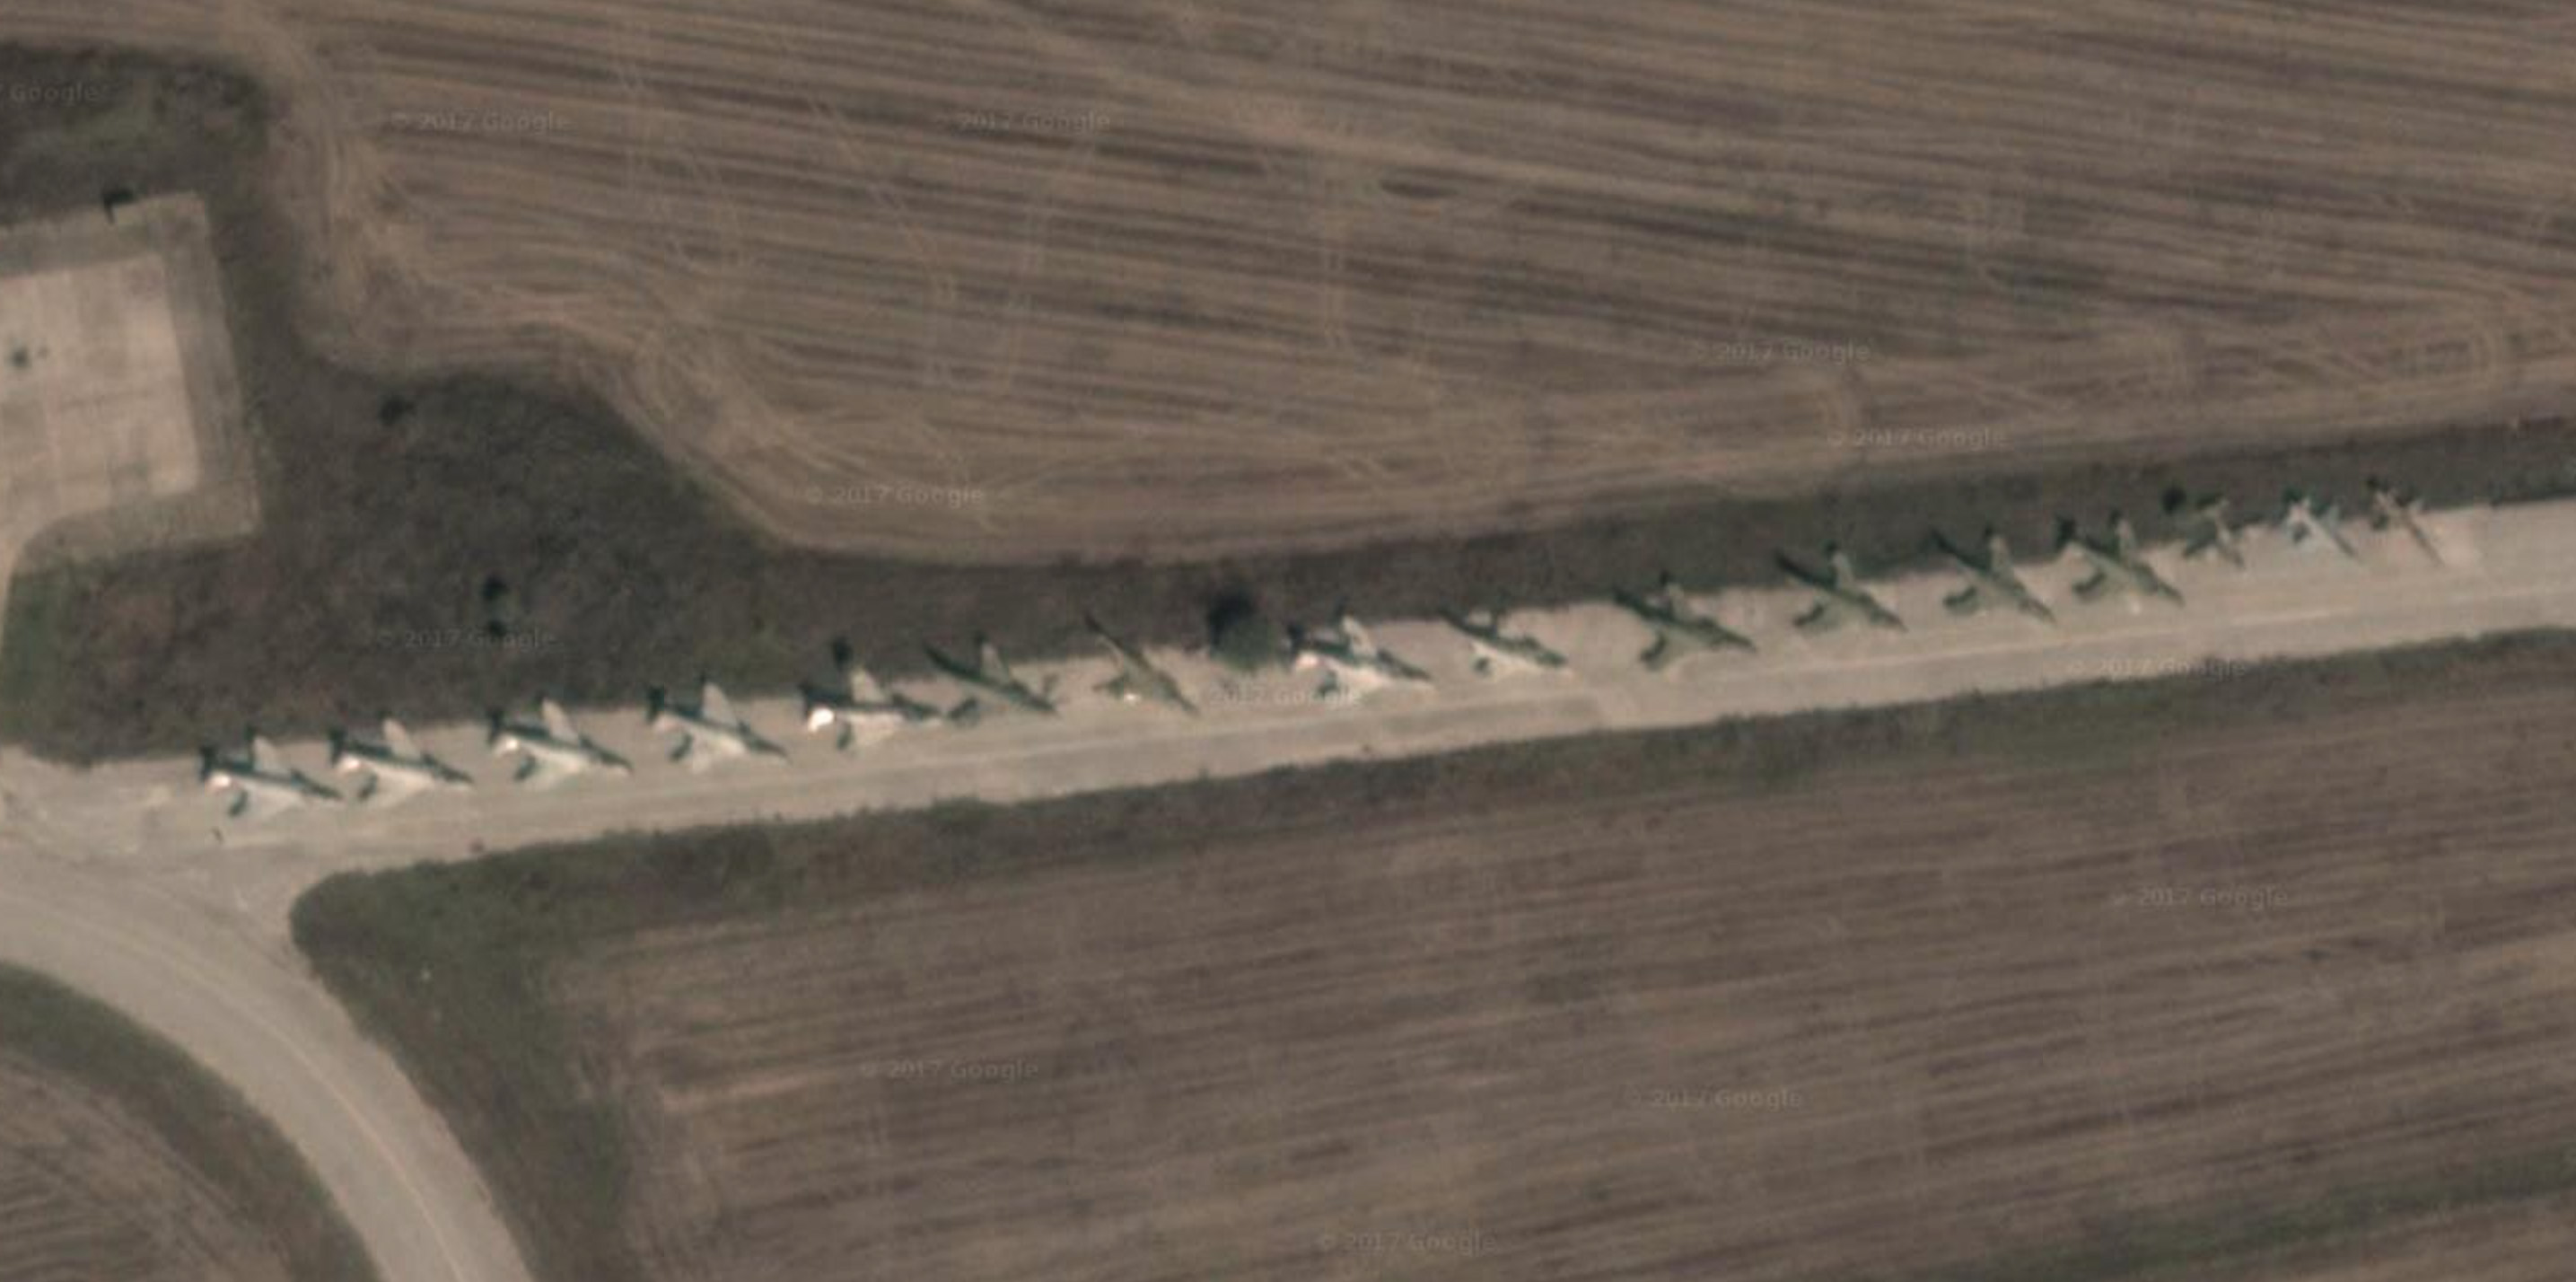 Some of the retired RF-4Es serving as decoys and parts sources at Larissa. (Photo via Googlemaps)